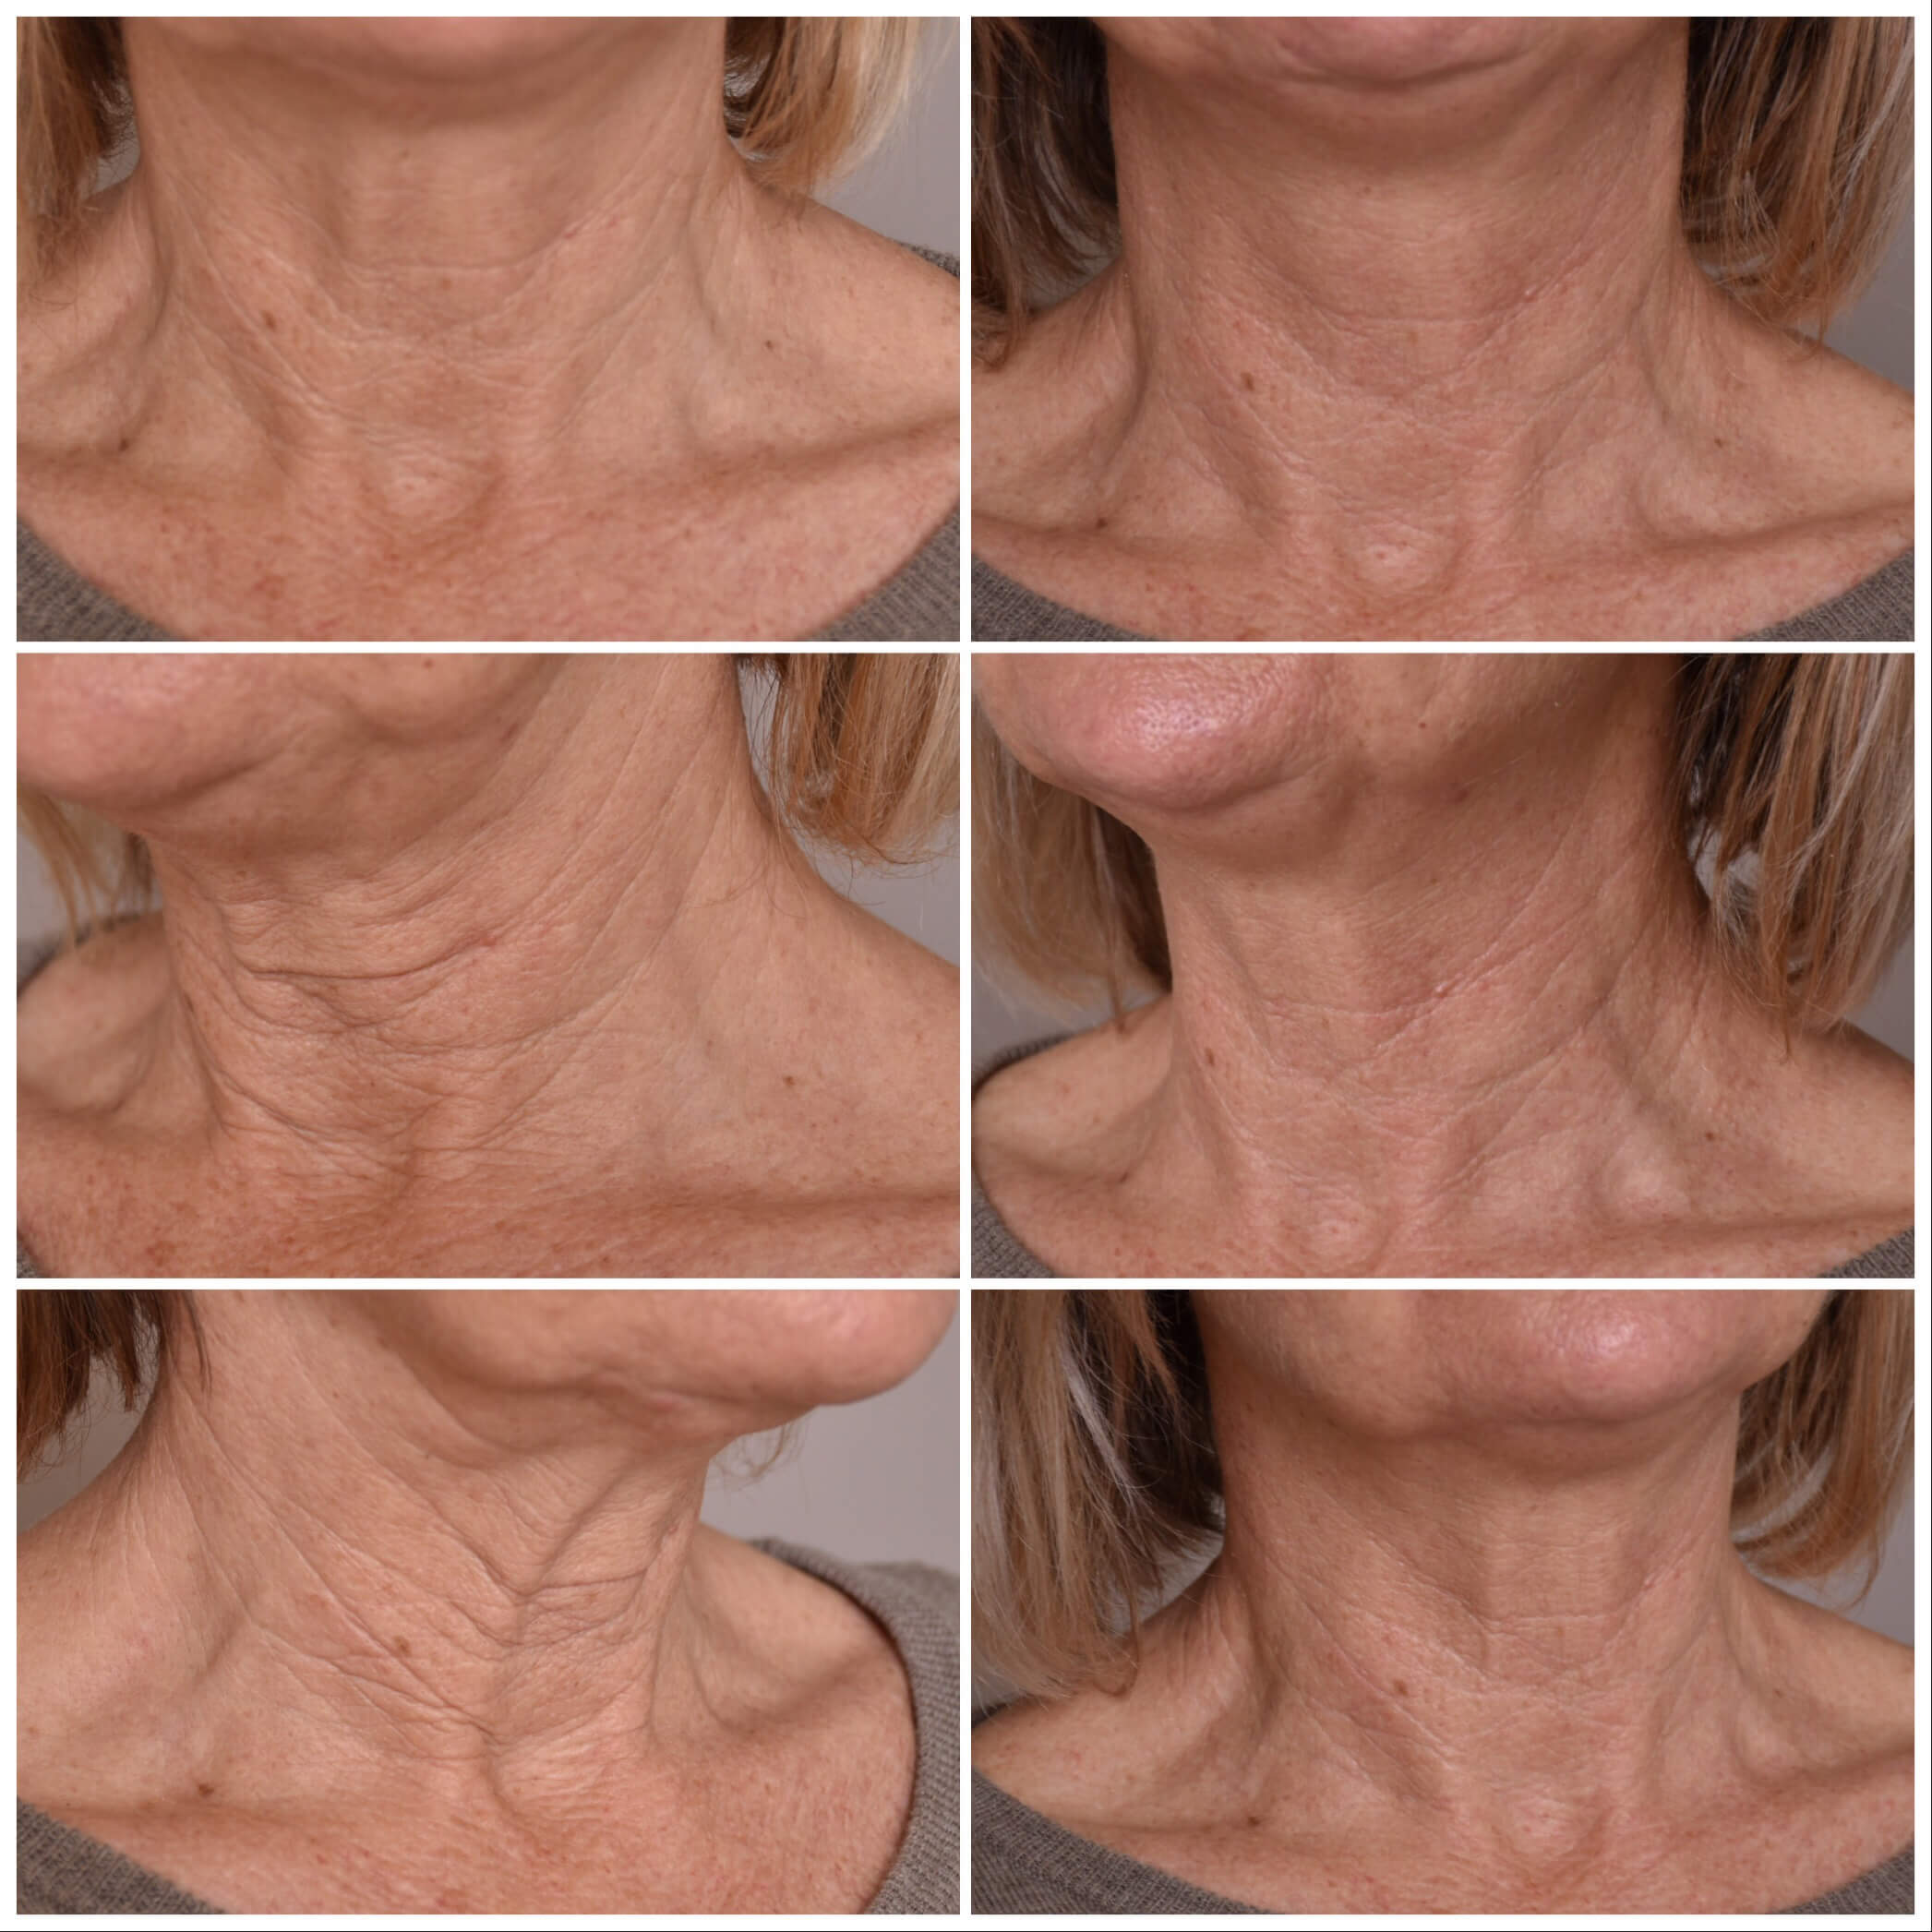 Effective Non-Surgical Skin Tightening Options - Westlake